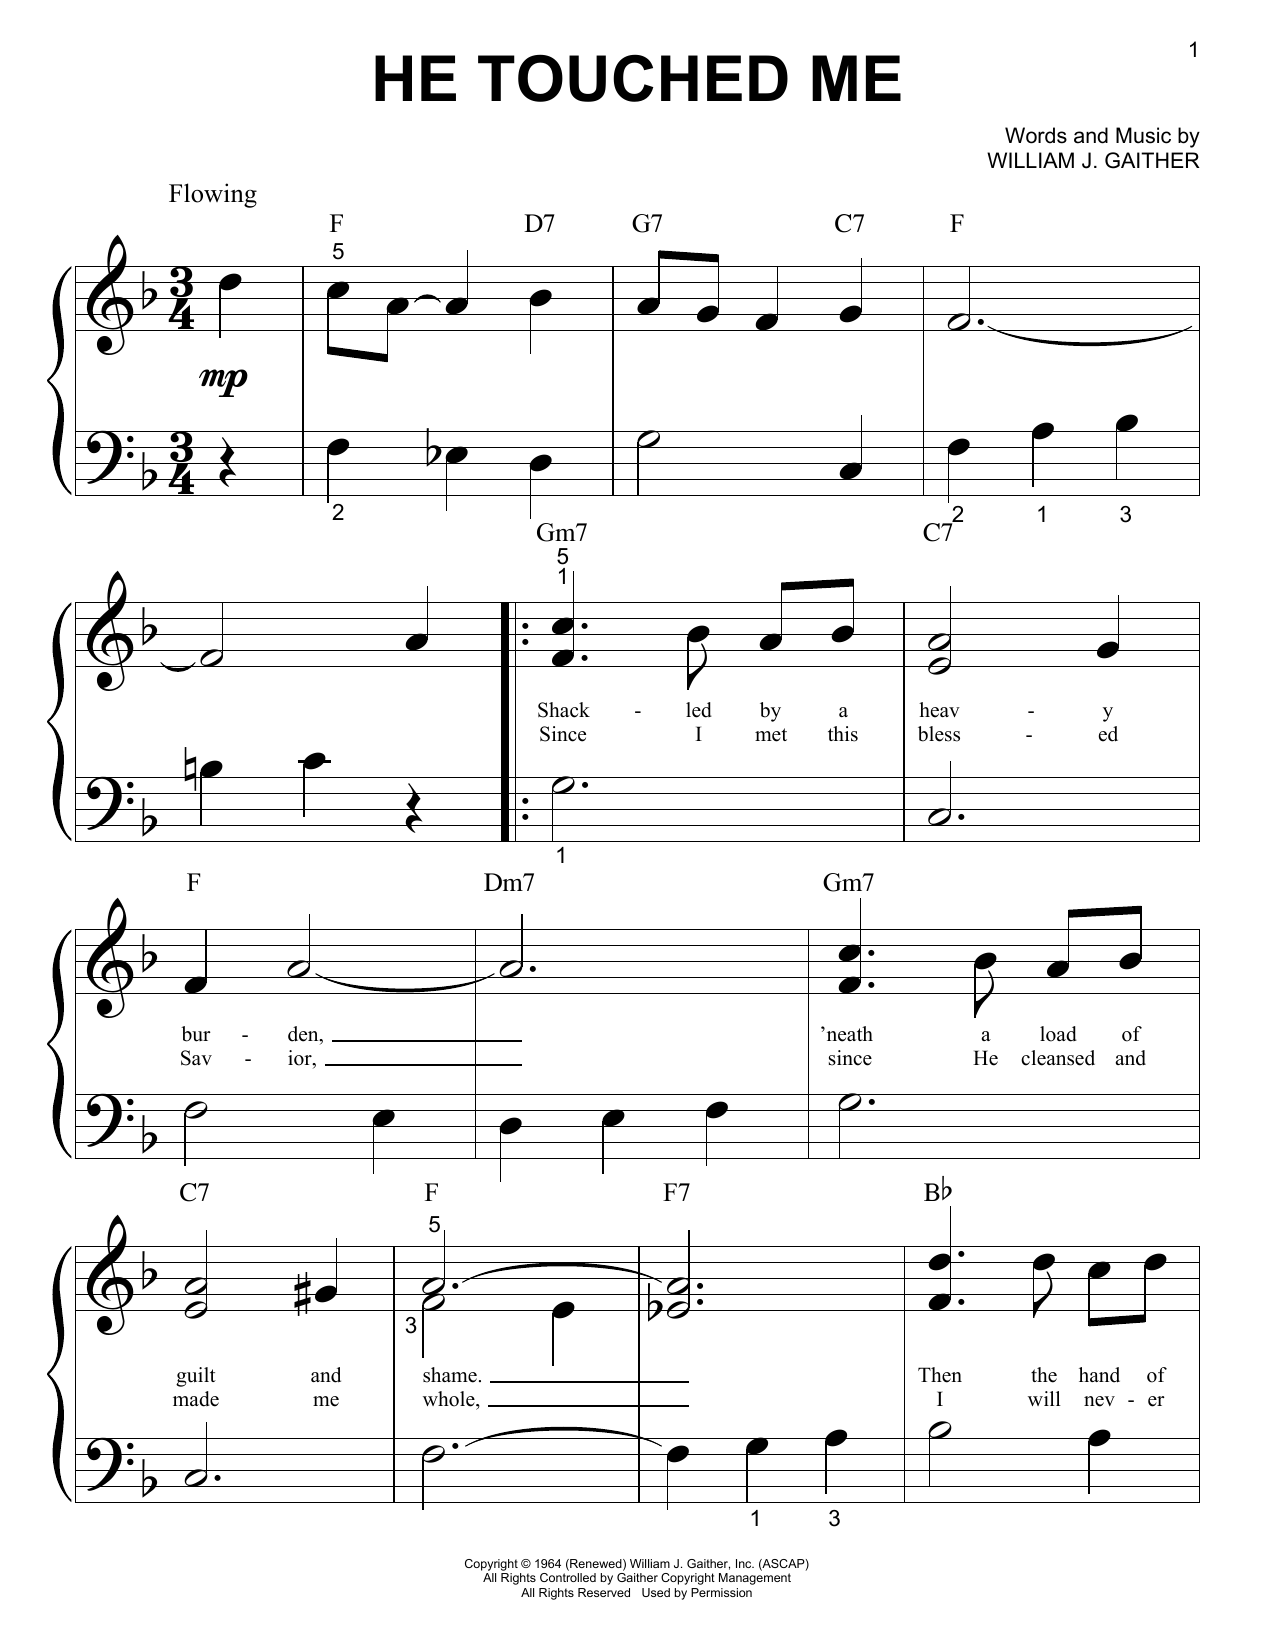 Download Bill & Gloria Gaither He Touched Me Sheet Music